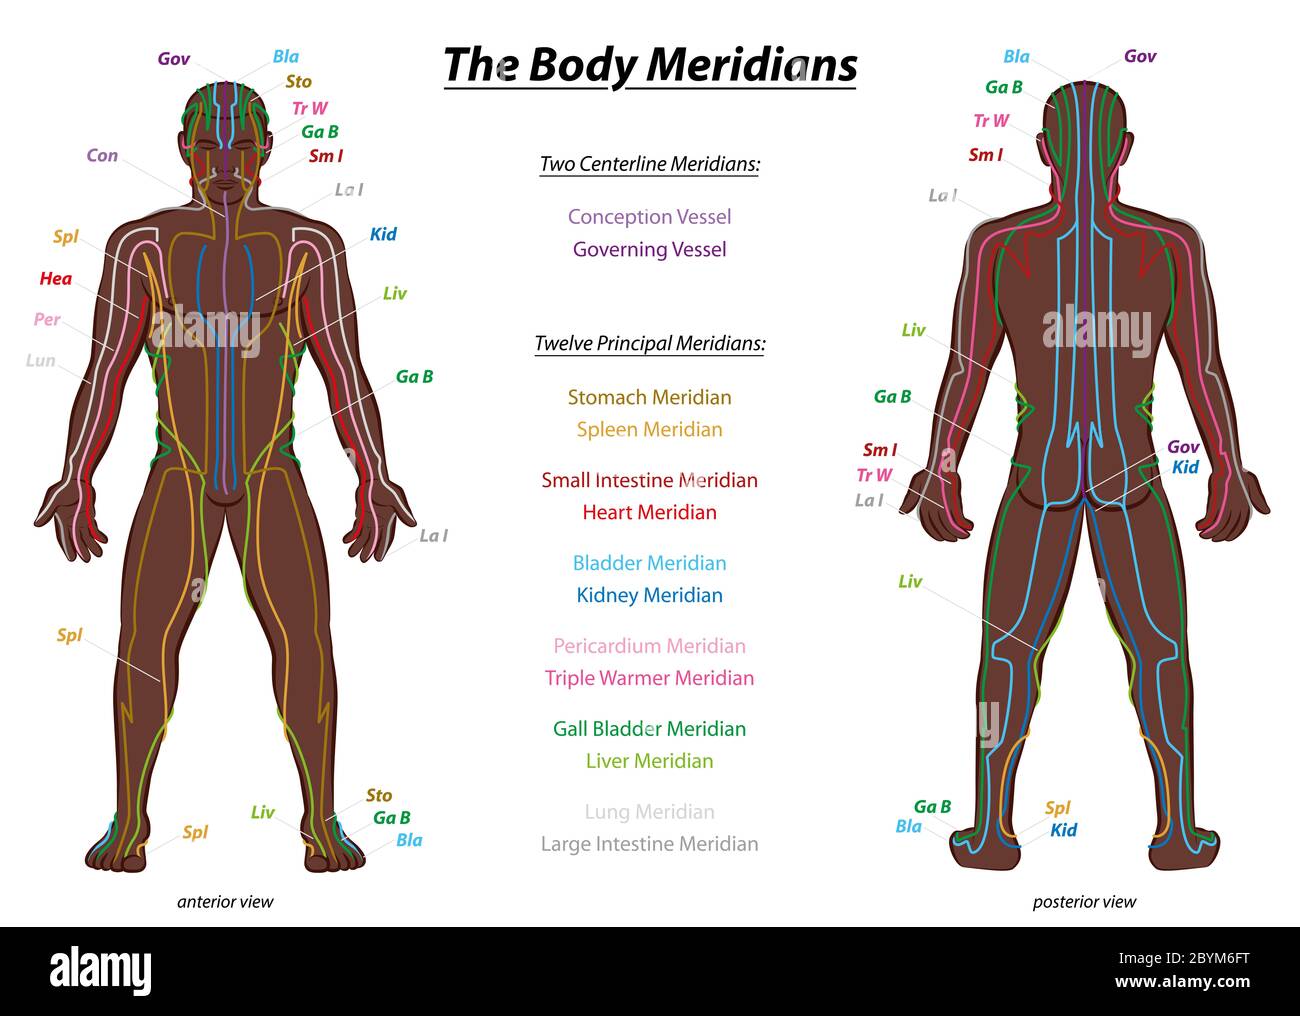 MERIDIAN SYSTEM CHART, black man, male body with labelled meridians - anterior and posterior view - Traditional Chinese Medicine. Stock Photo